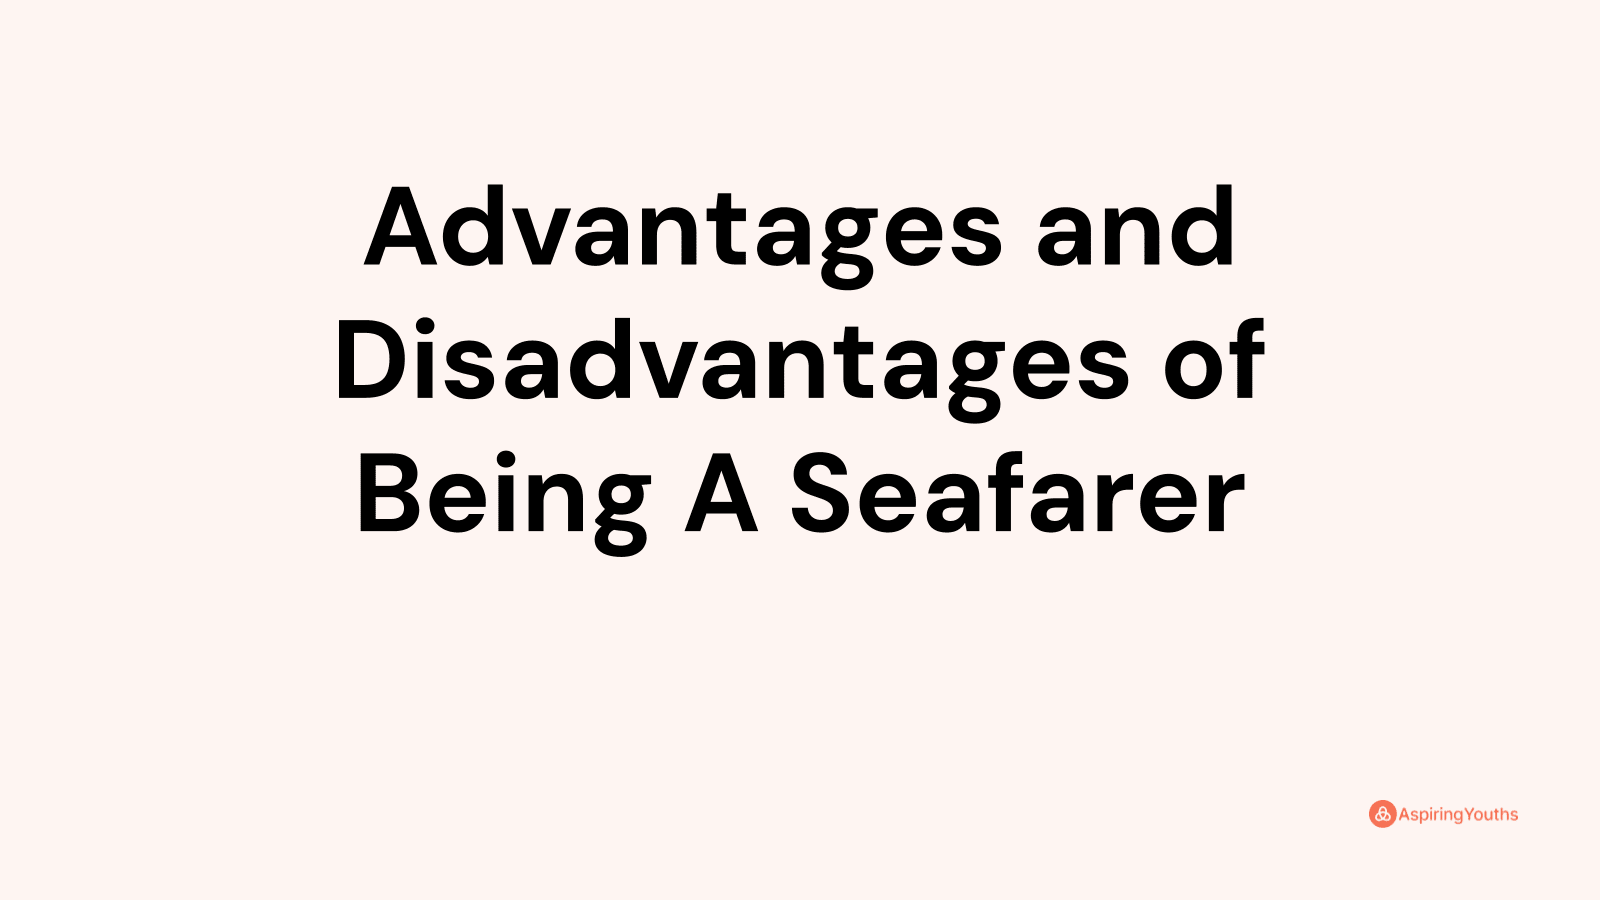 Advantages and disadvantages of Being A Seafarer